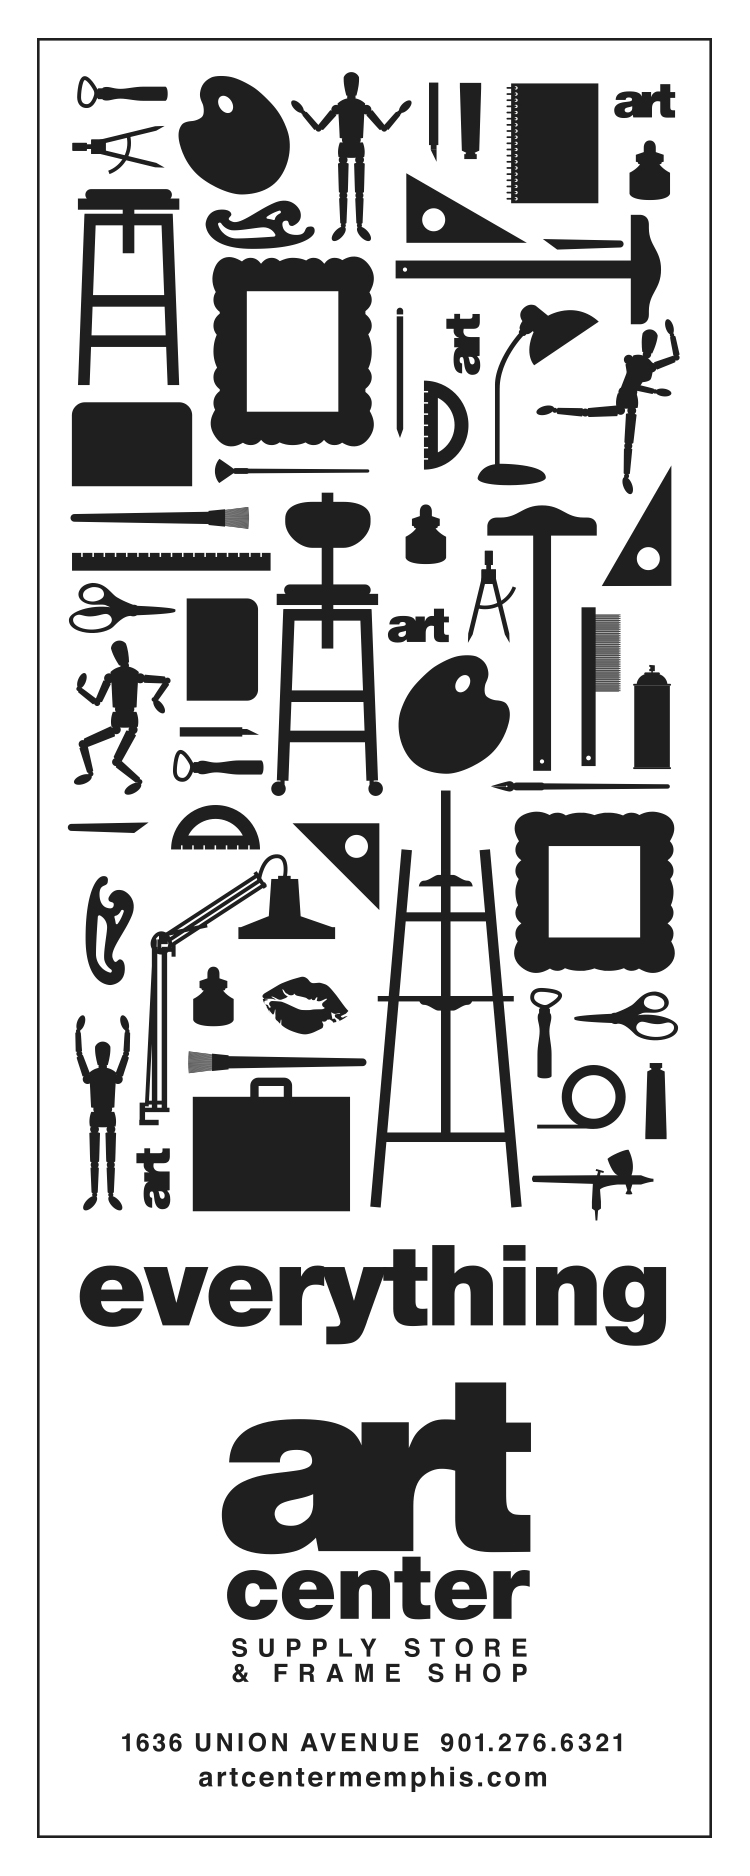  Art Center "everything" ad for Number  Creative, copywriting and design by Chuck Mitchell 